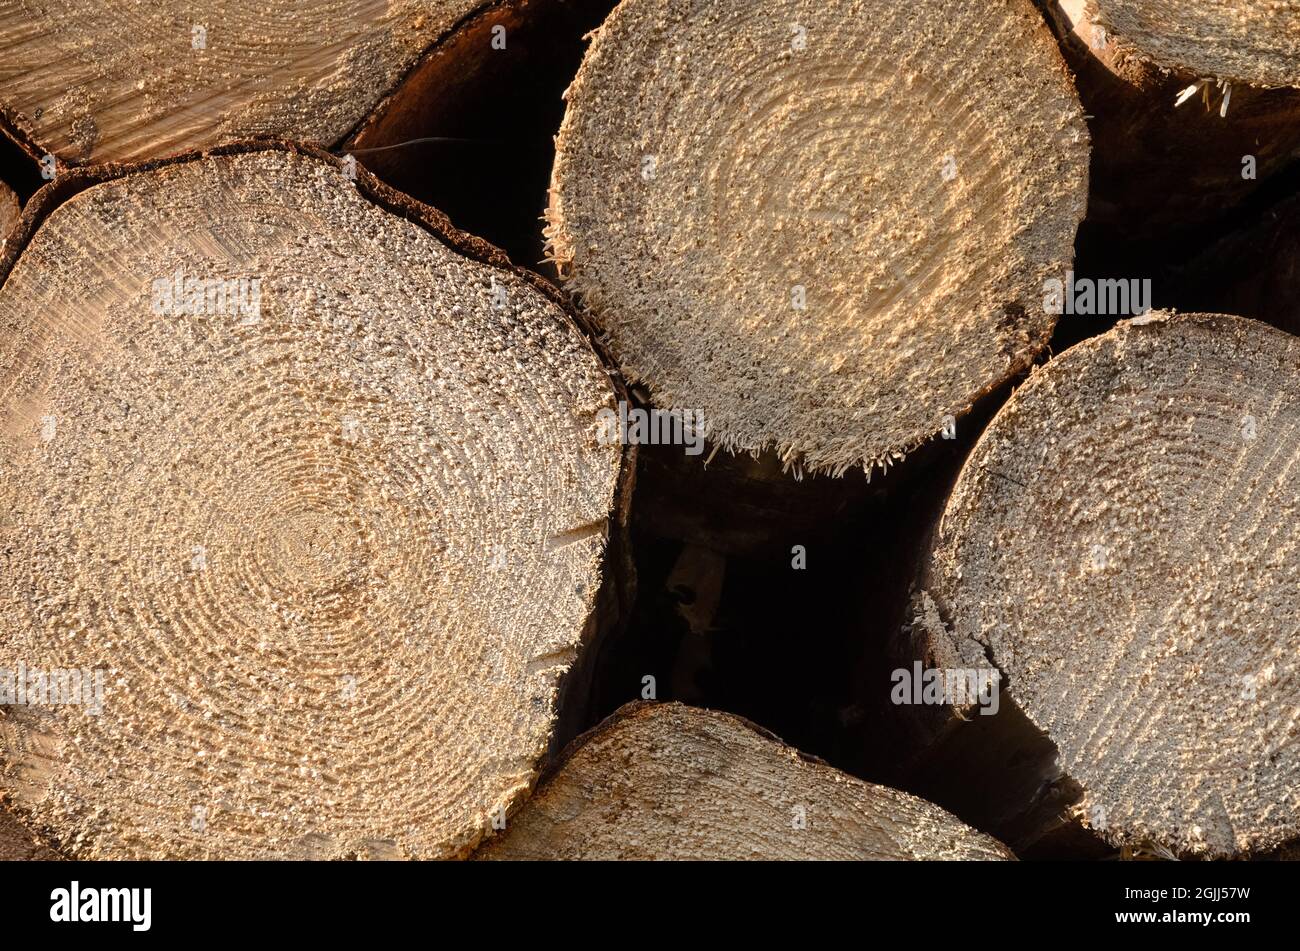 Pile of felled trees at a logging site in the forest, front view of cross section with growth or age rings, timber industry Stock Photo